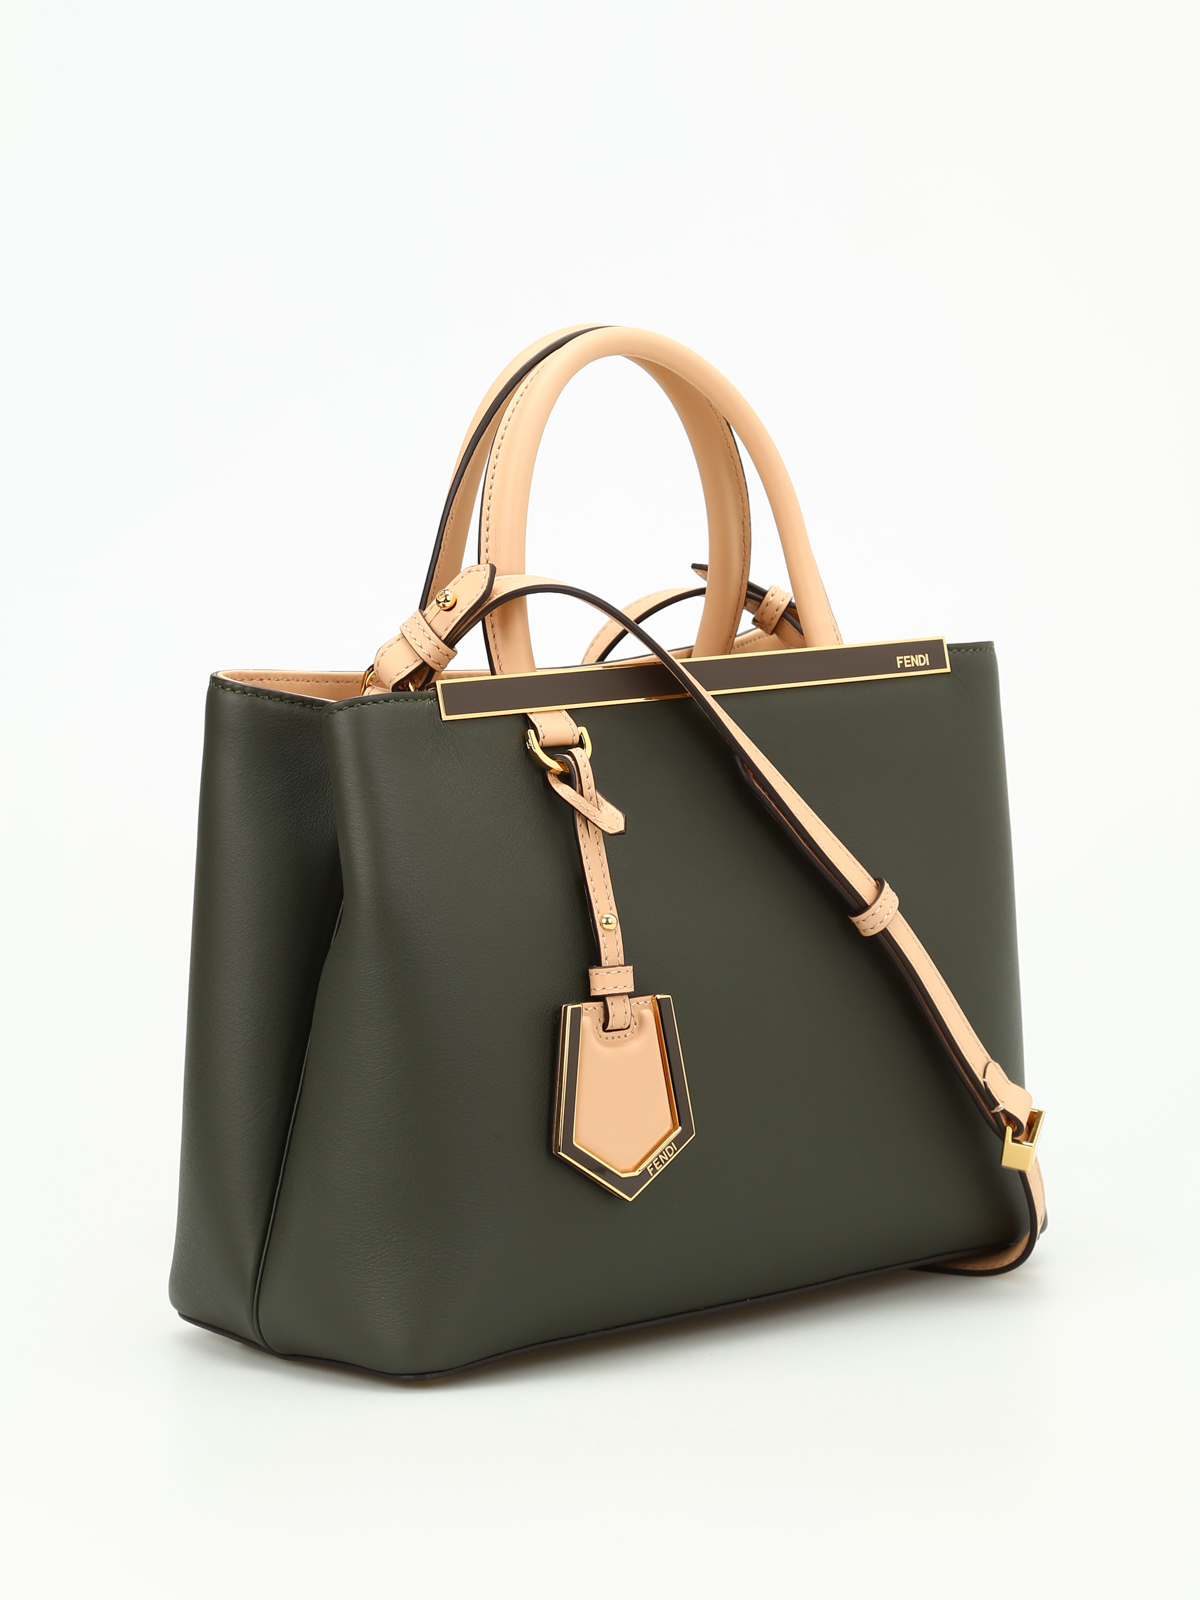 Jours two-tone leather bag - totes bags 